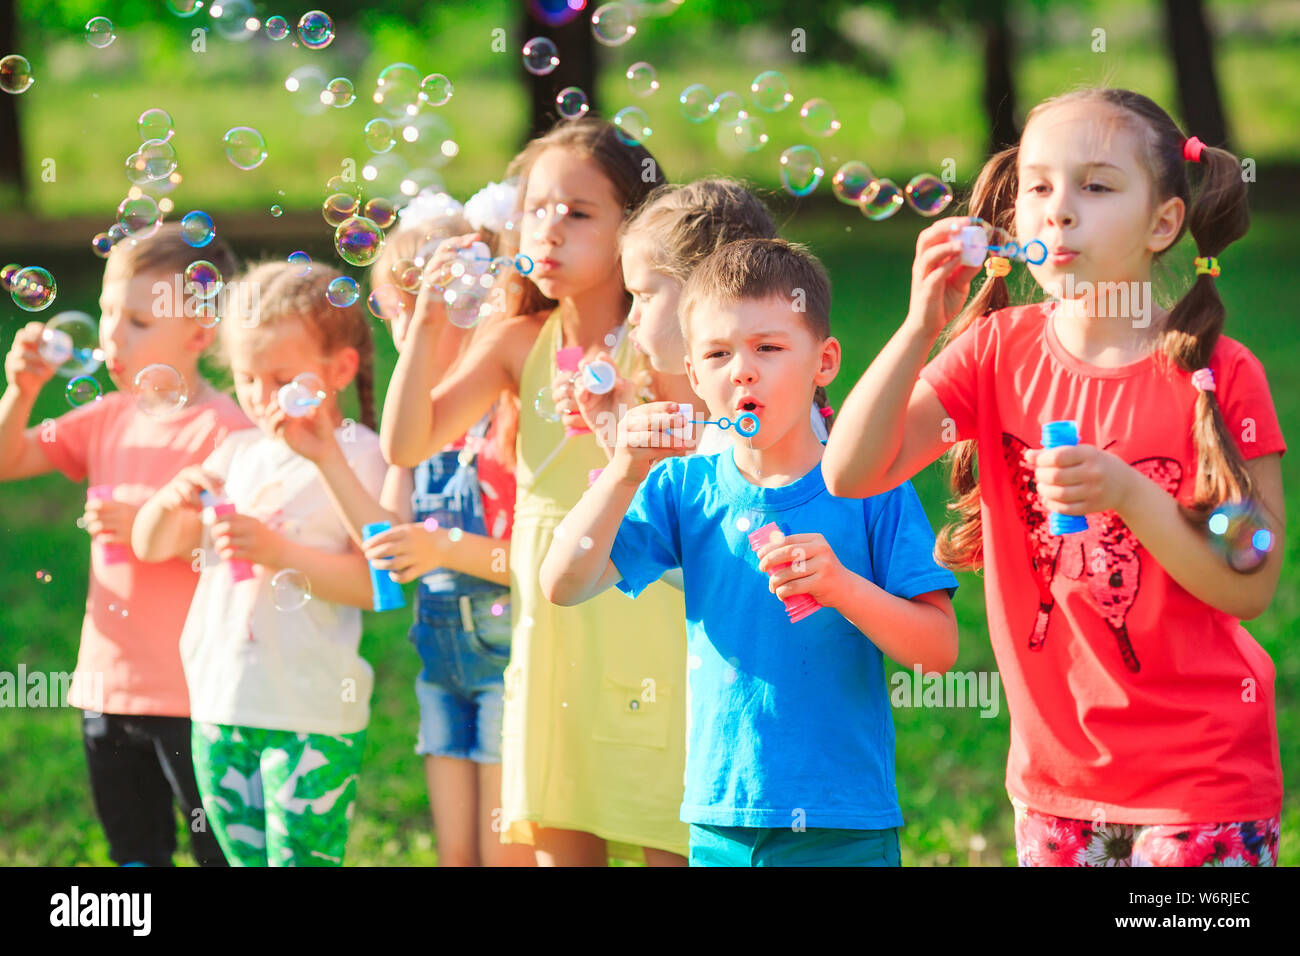 The Group Of Children Blowing Soap Bubbles Stock Photo Alamy